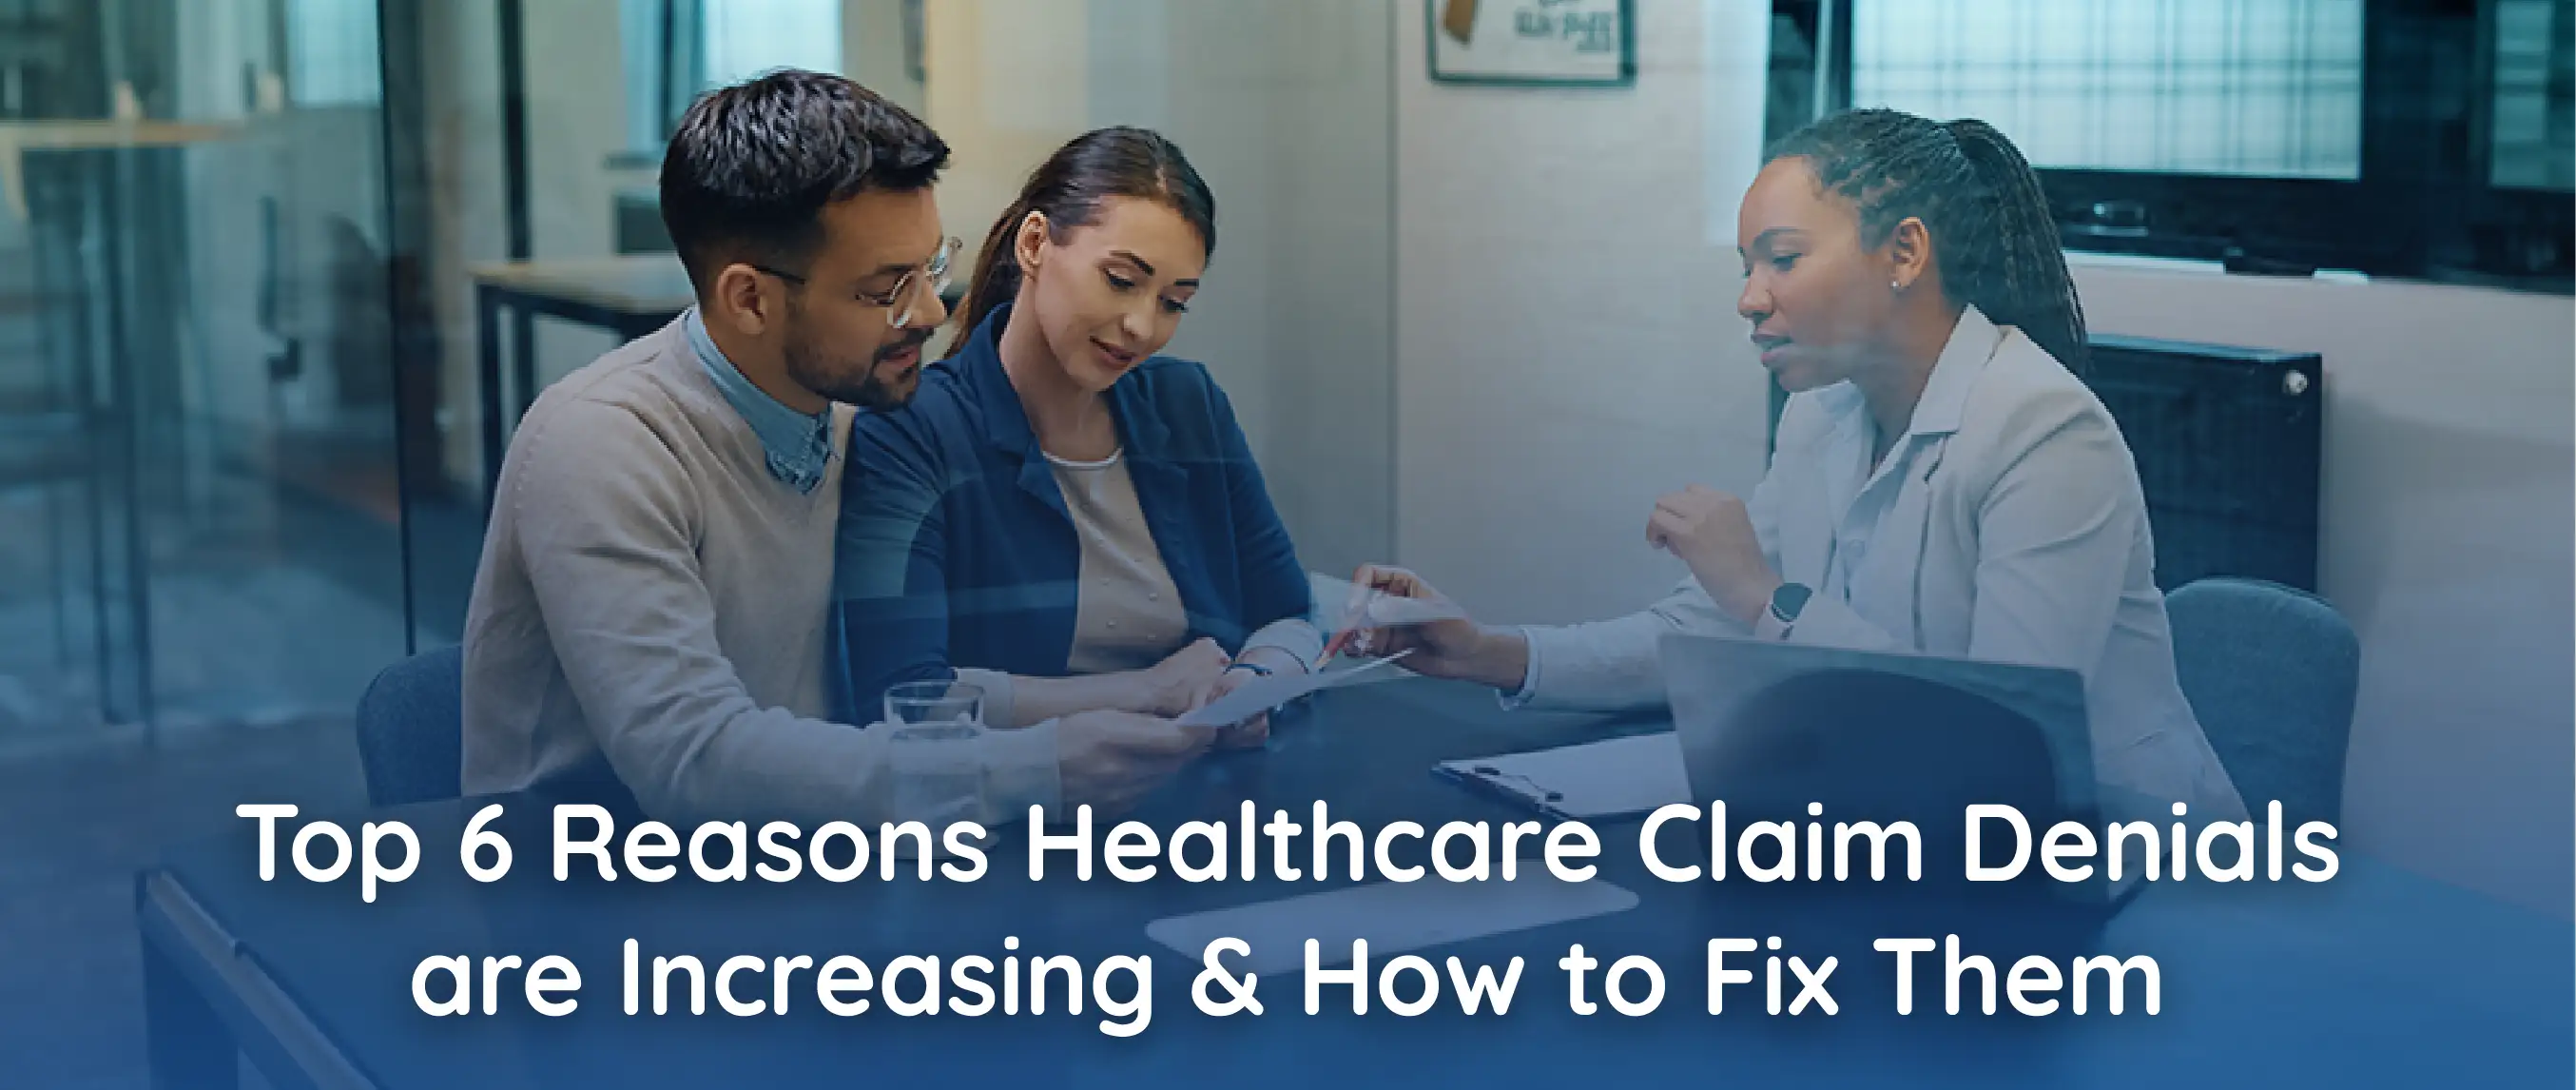 Top 6 Reasons Healthcare Claim Denials are Increasing and How to Fix Them